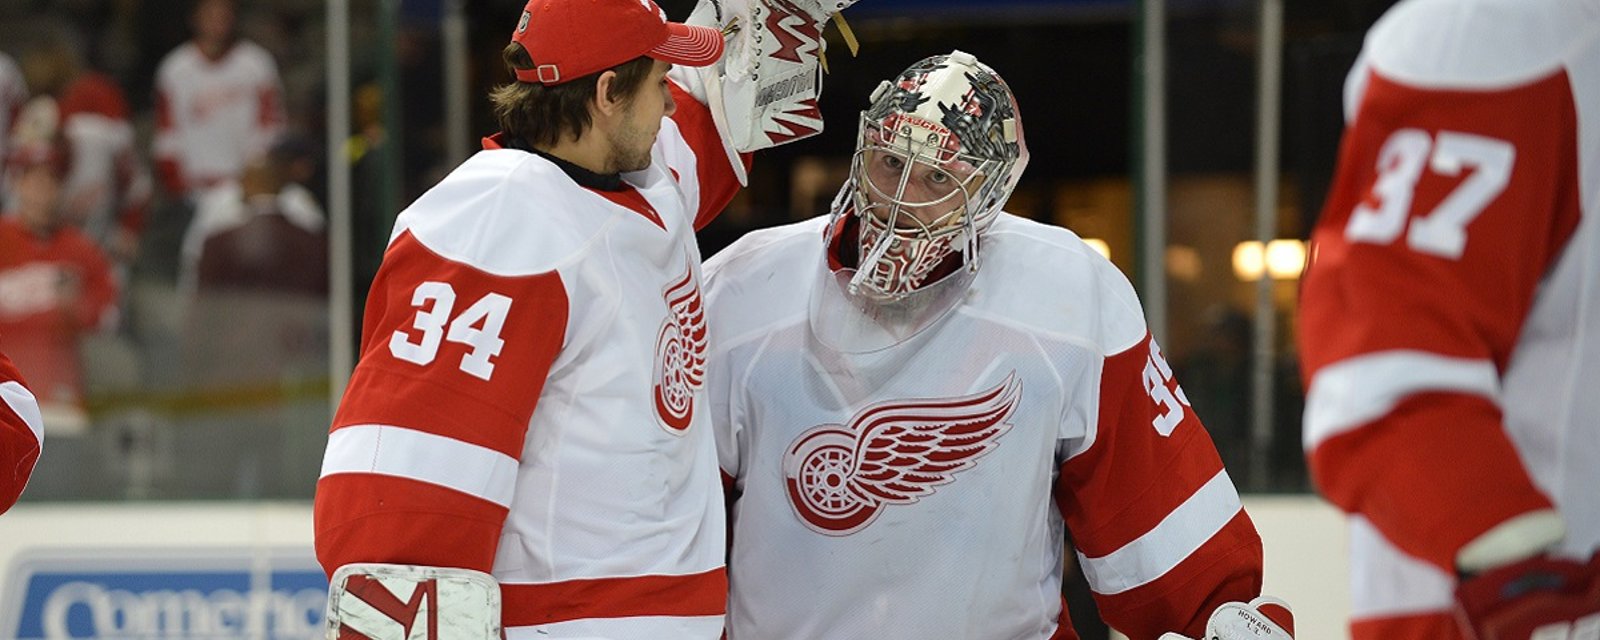 Breaking: The Red Wings have lost their starting goaltender to injury.